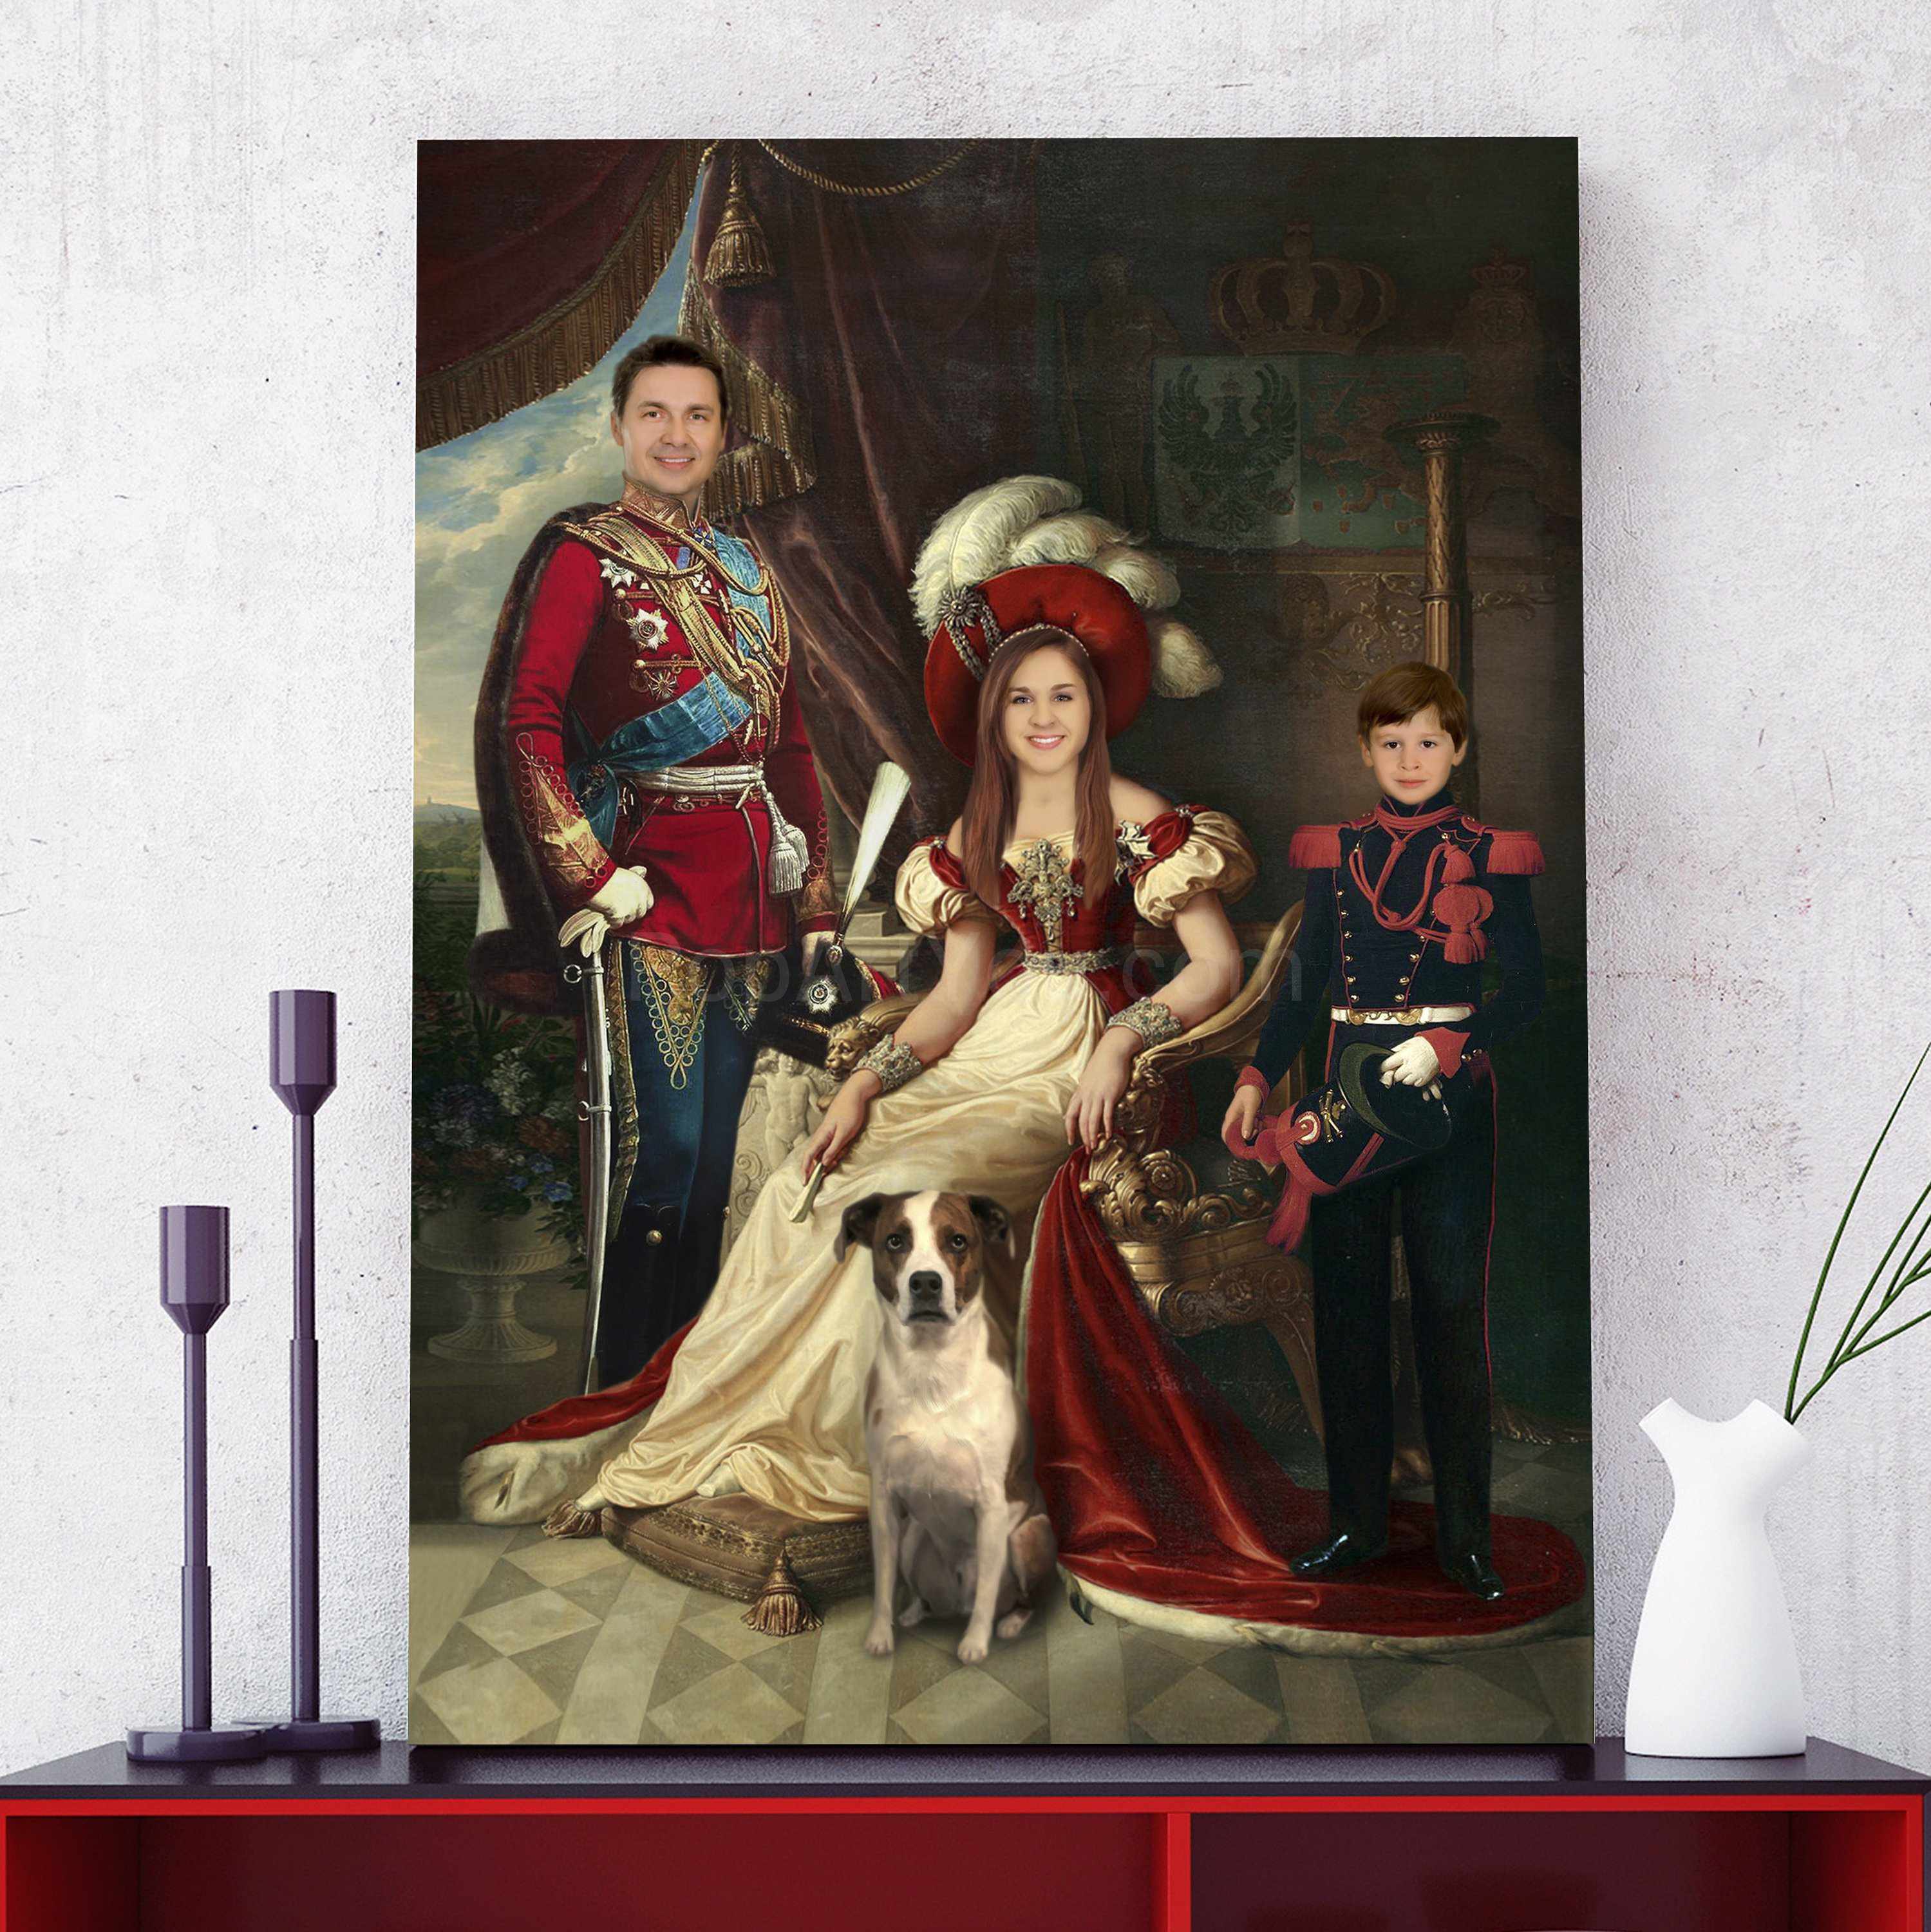 A portrait of a family dressed in historical regal attires stands on a red table near a white vase